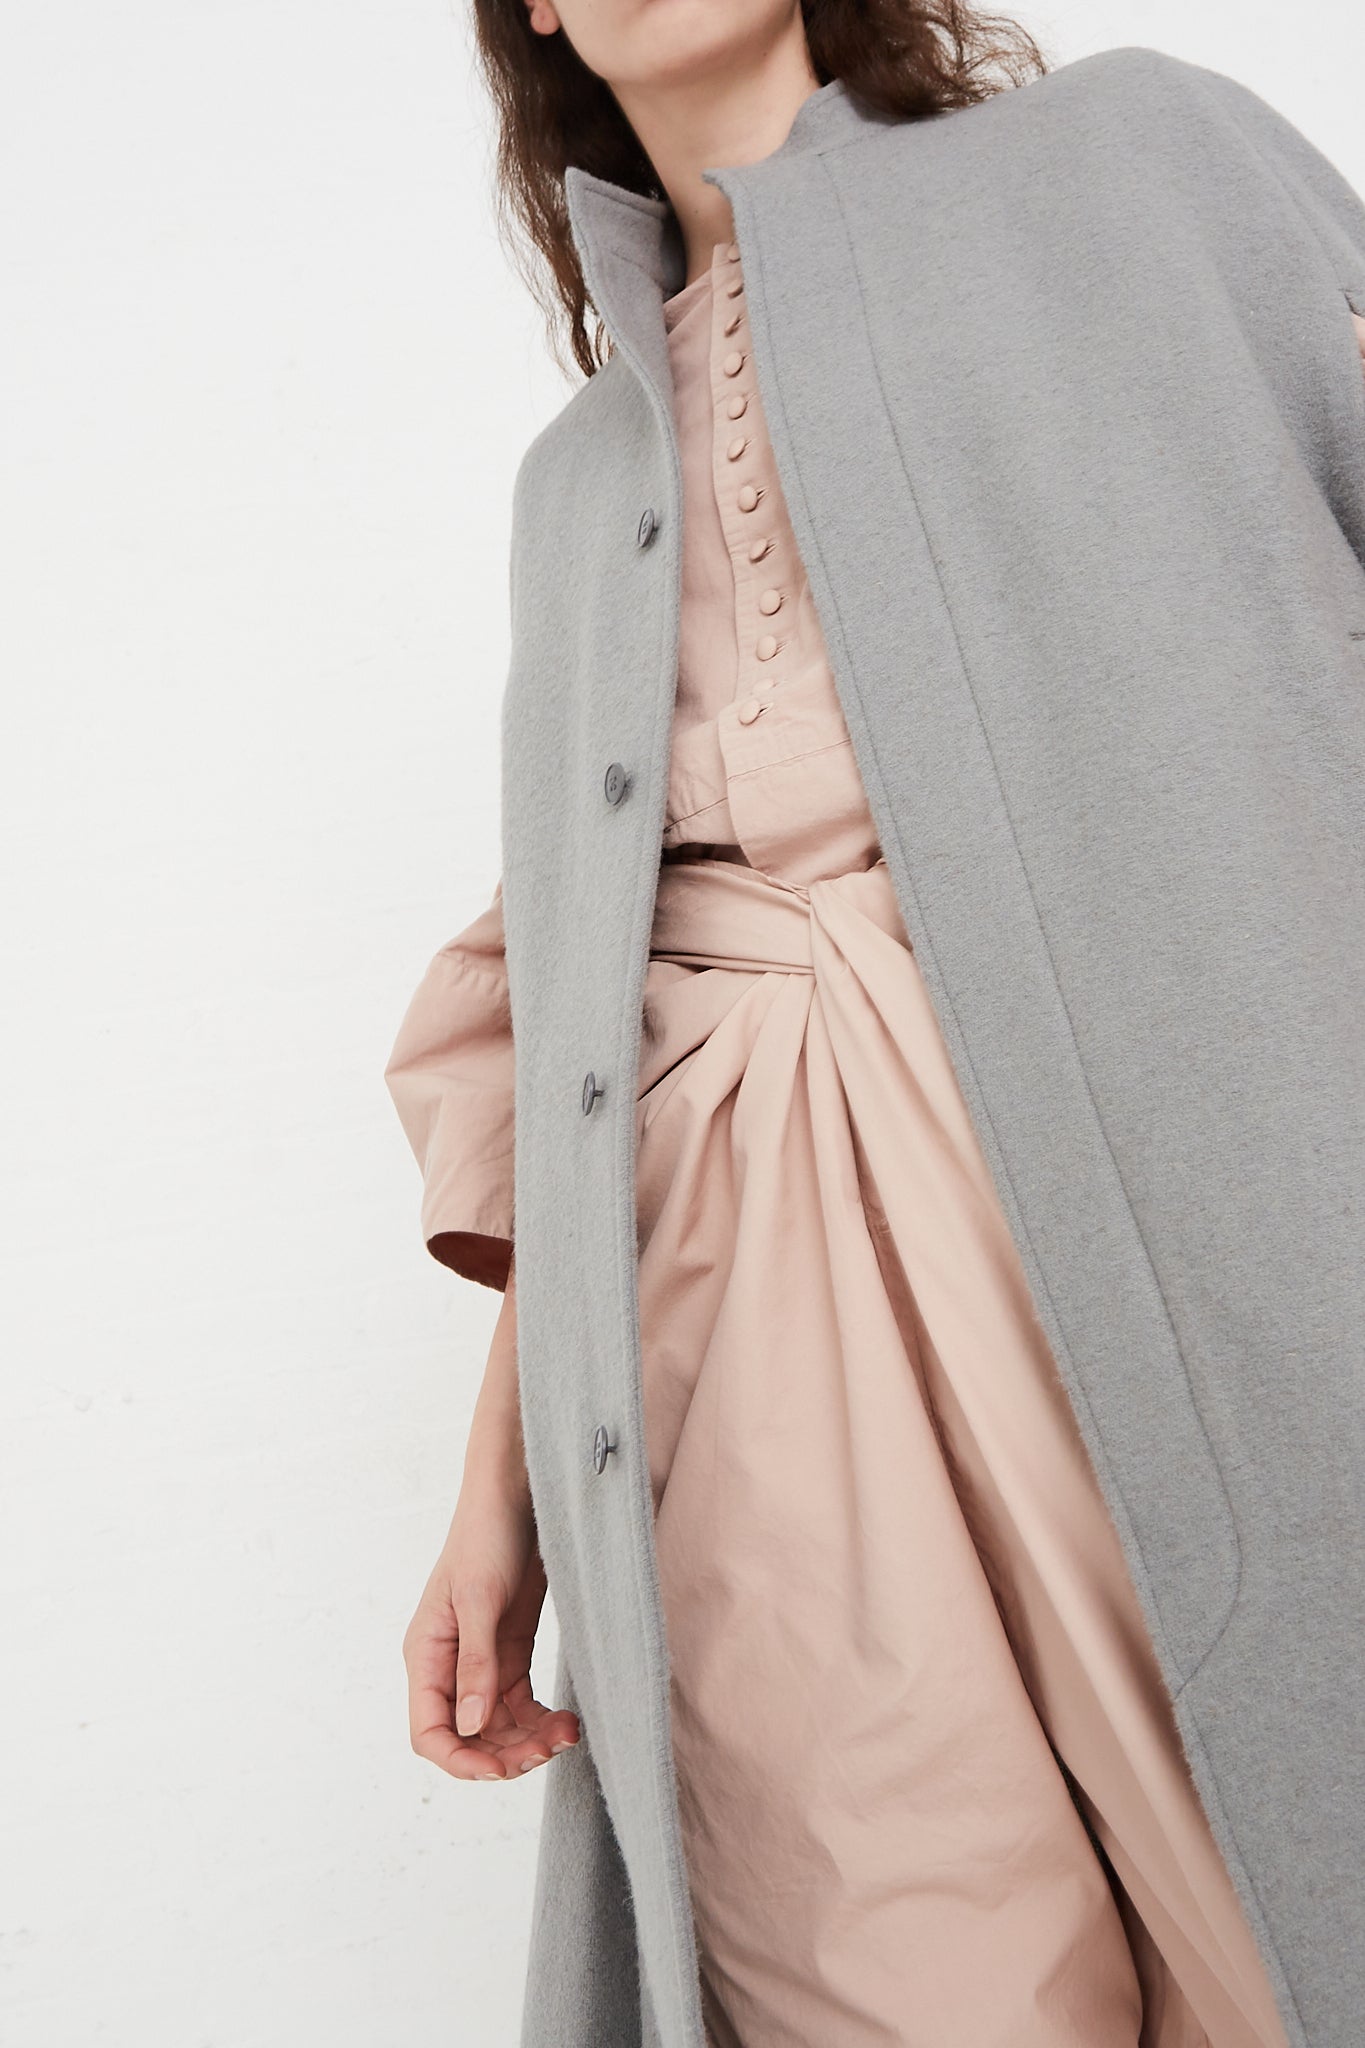 A model wearing a Japanese Suffolk Melton Cloak in Grey by Cosmic Wonder and pink pants.